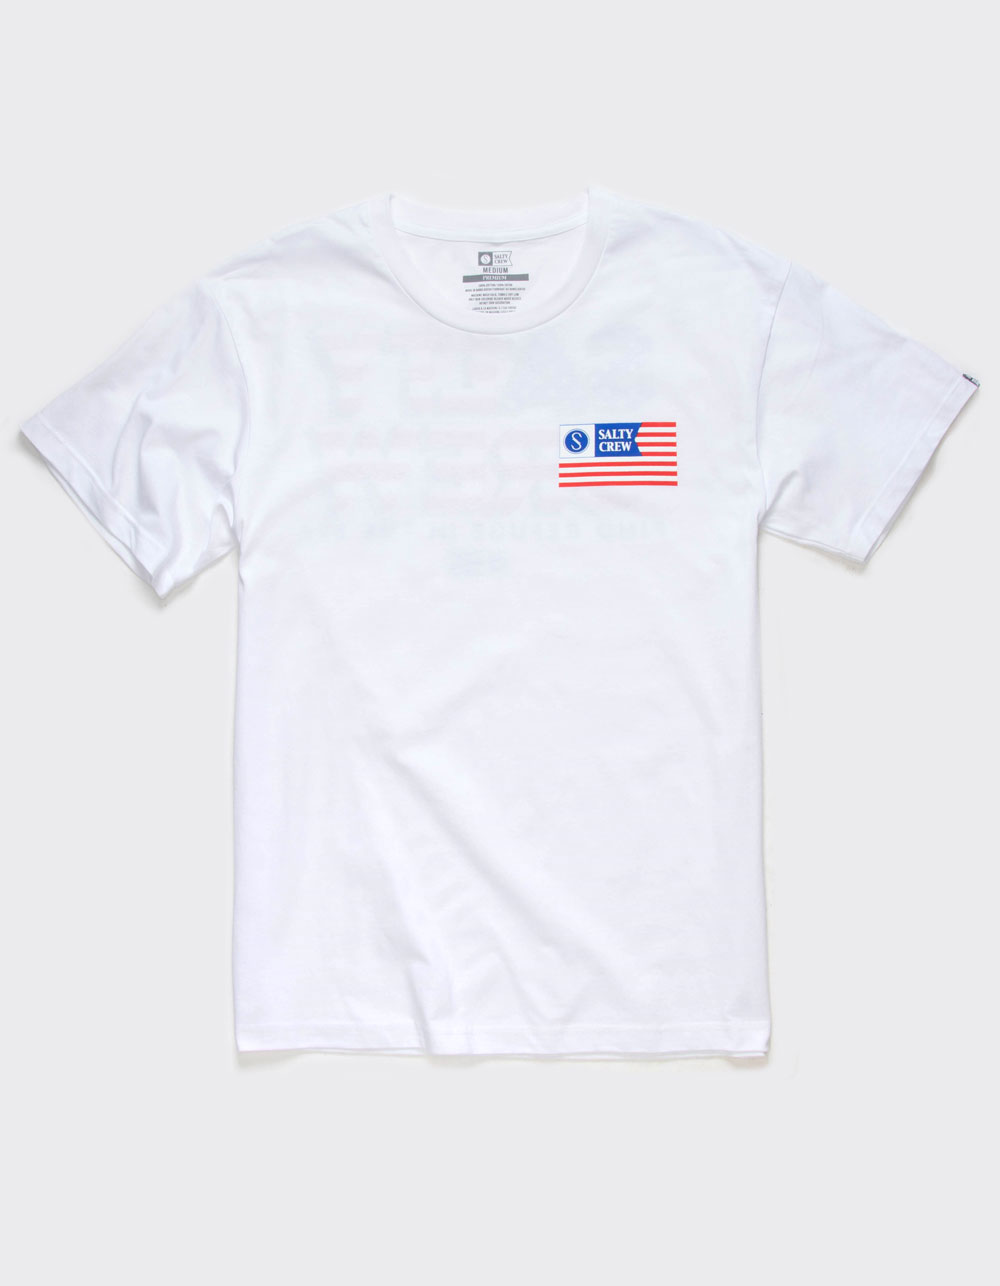 SALTY CREW Stars And Stripes Mens Tee - WHITE | Tillys